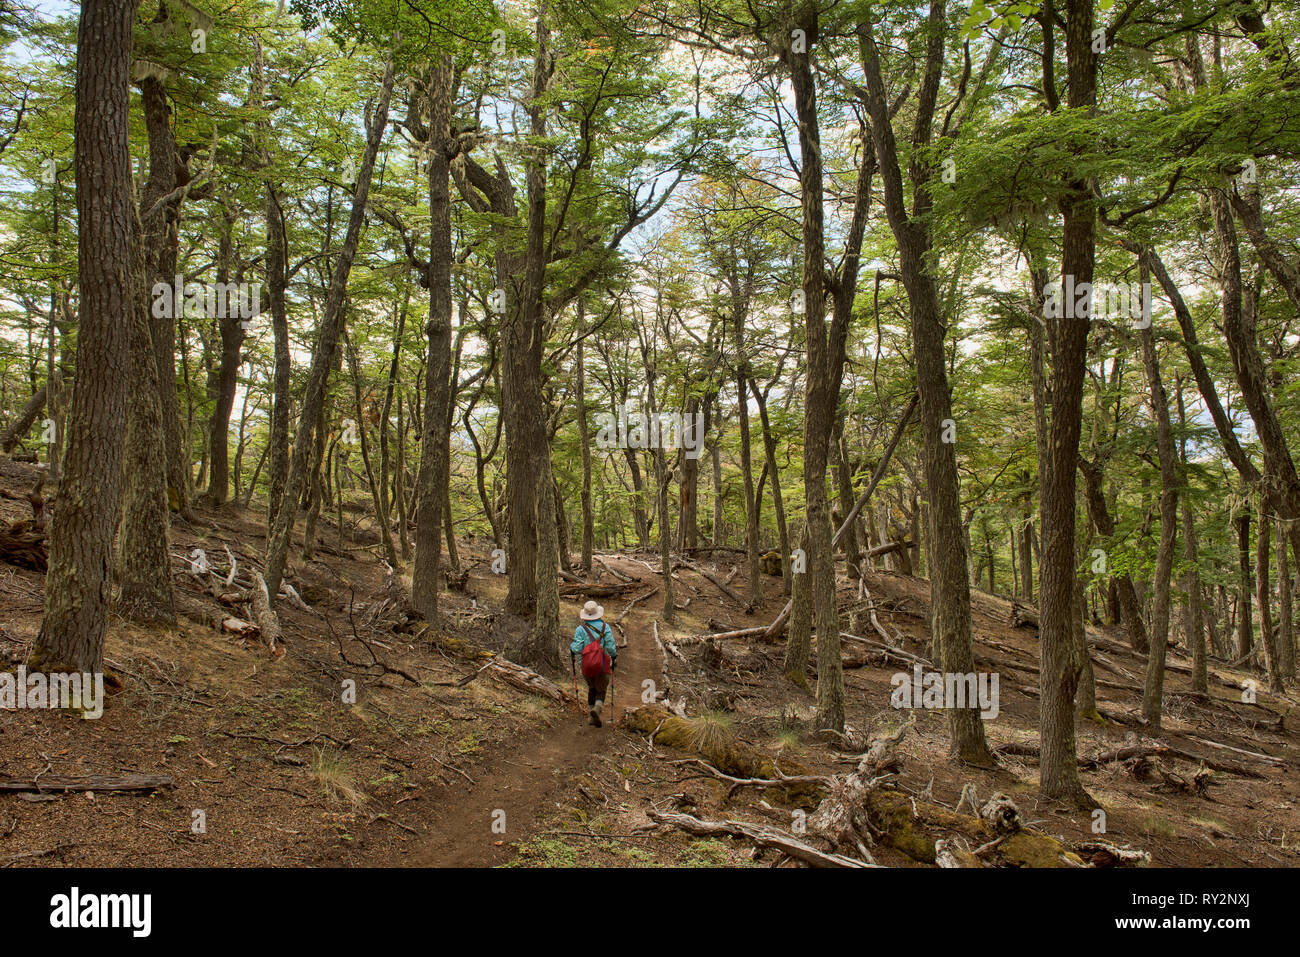 Trekking in a lenga (beech) forest, Patagonia National Park, Aysen, Patagonia, Chile Stock Photo